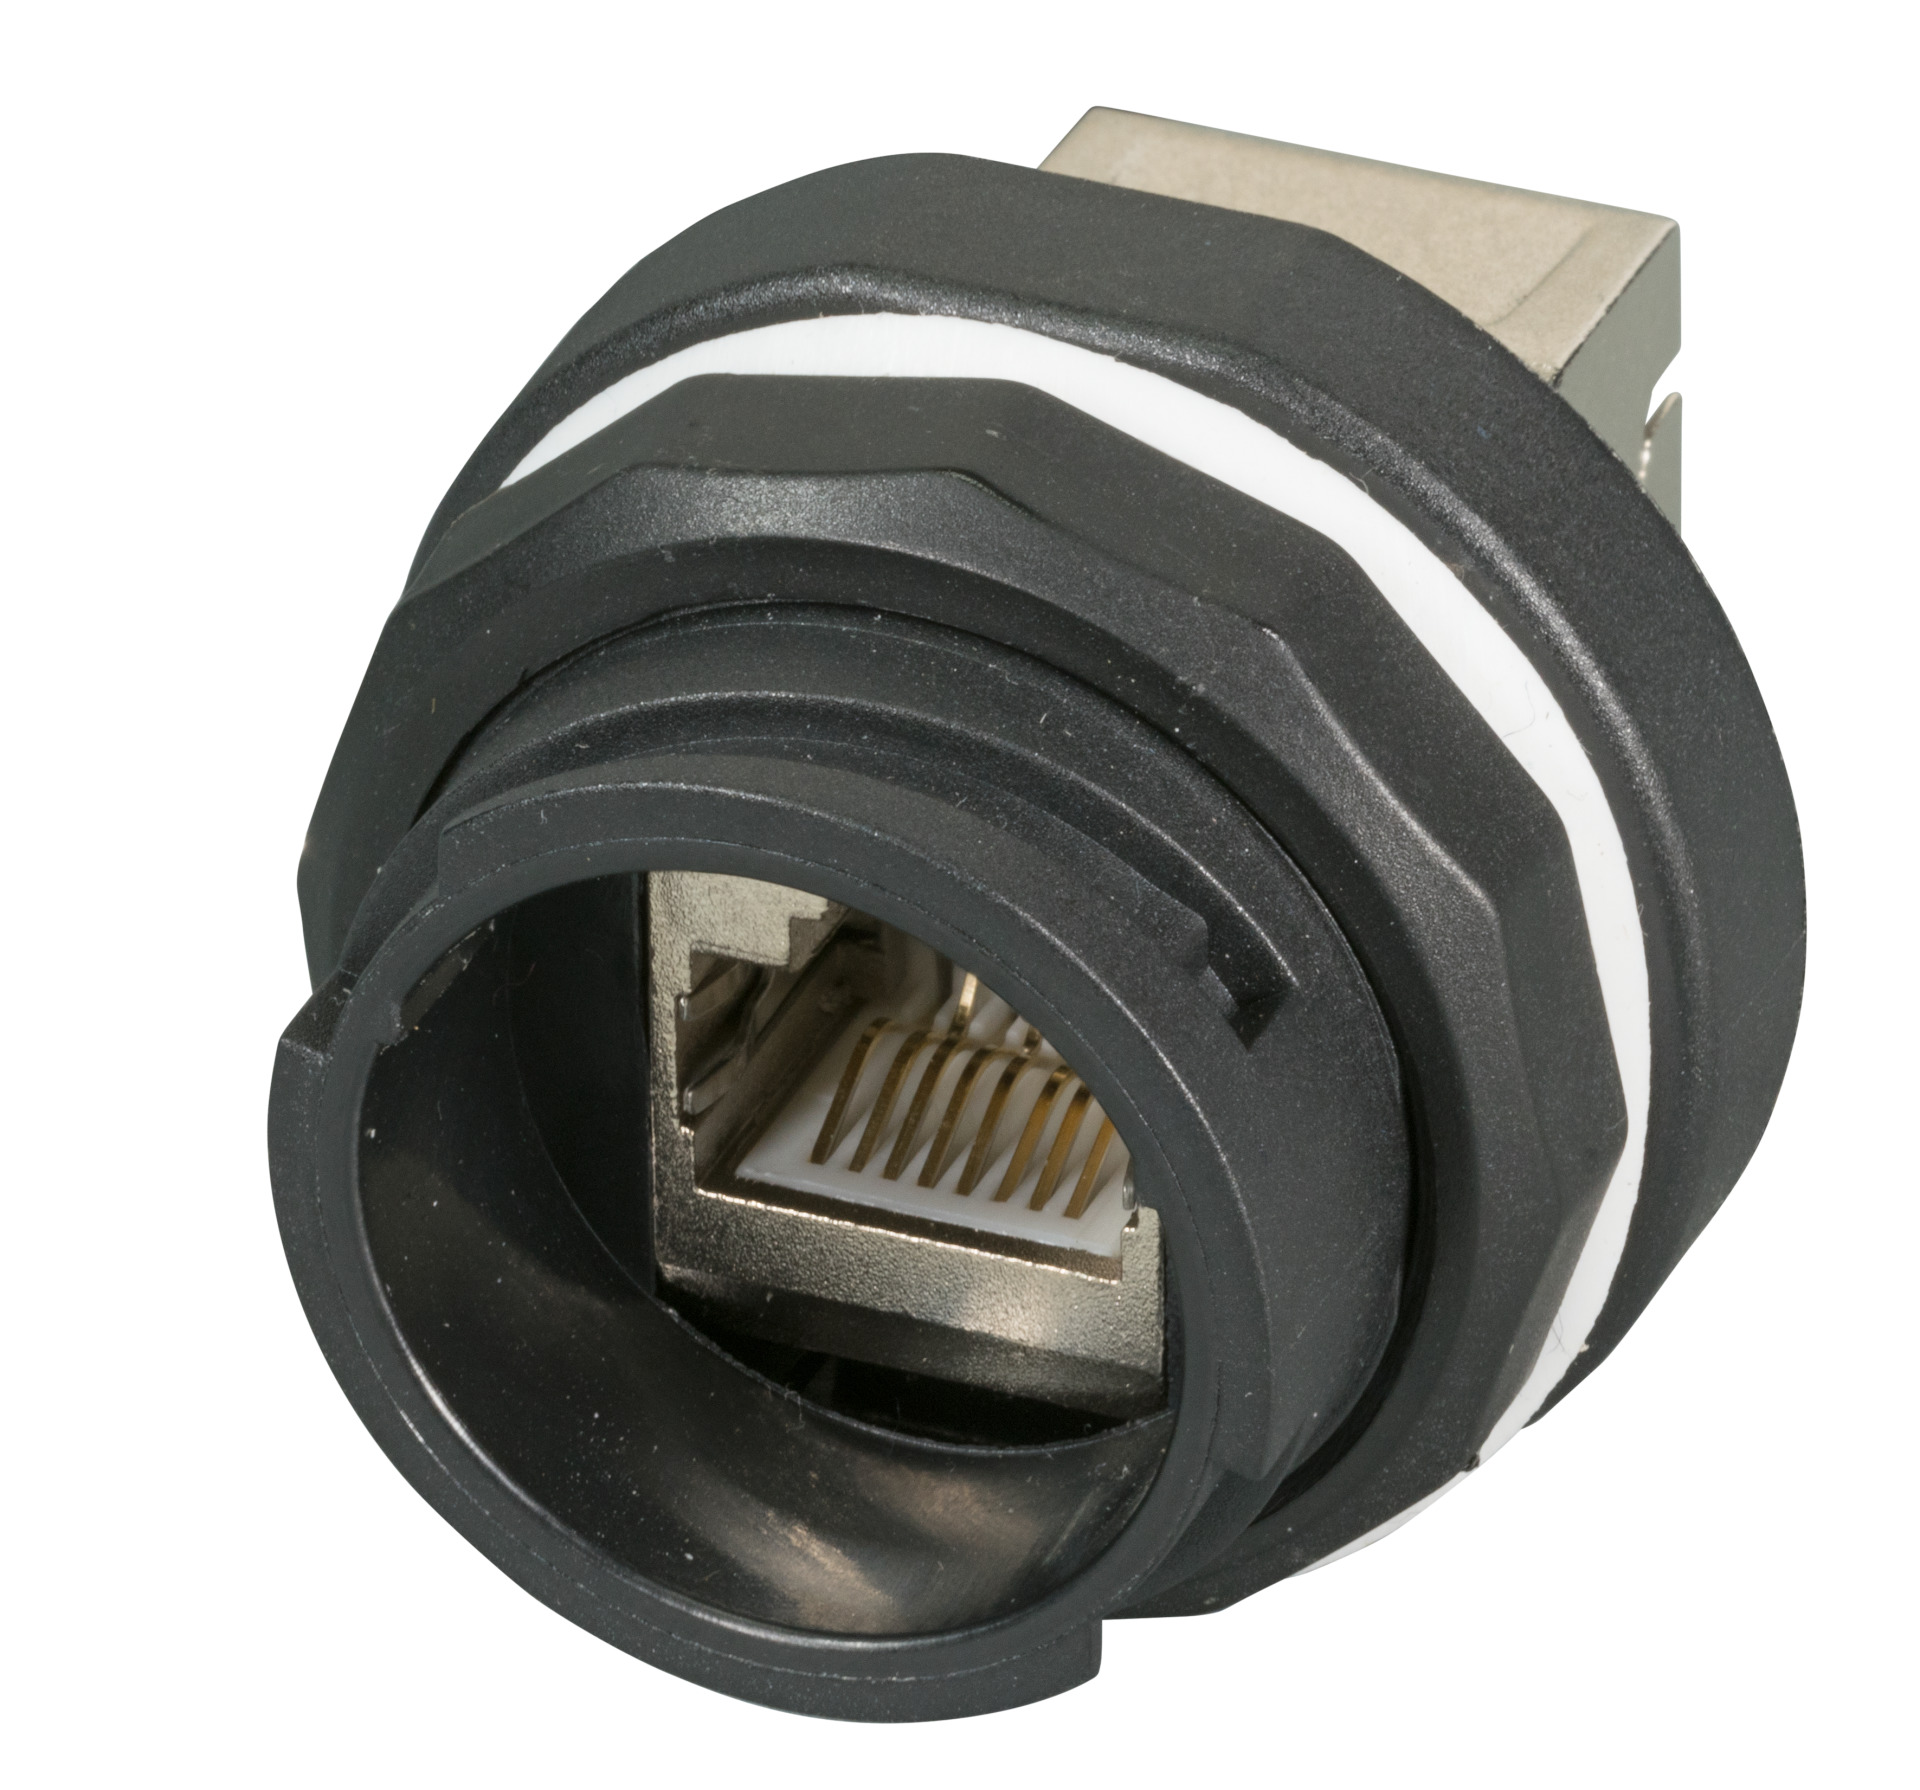 IP68 Receptacle for keystone modules and adapters, Bayonet locking